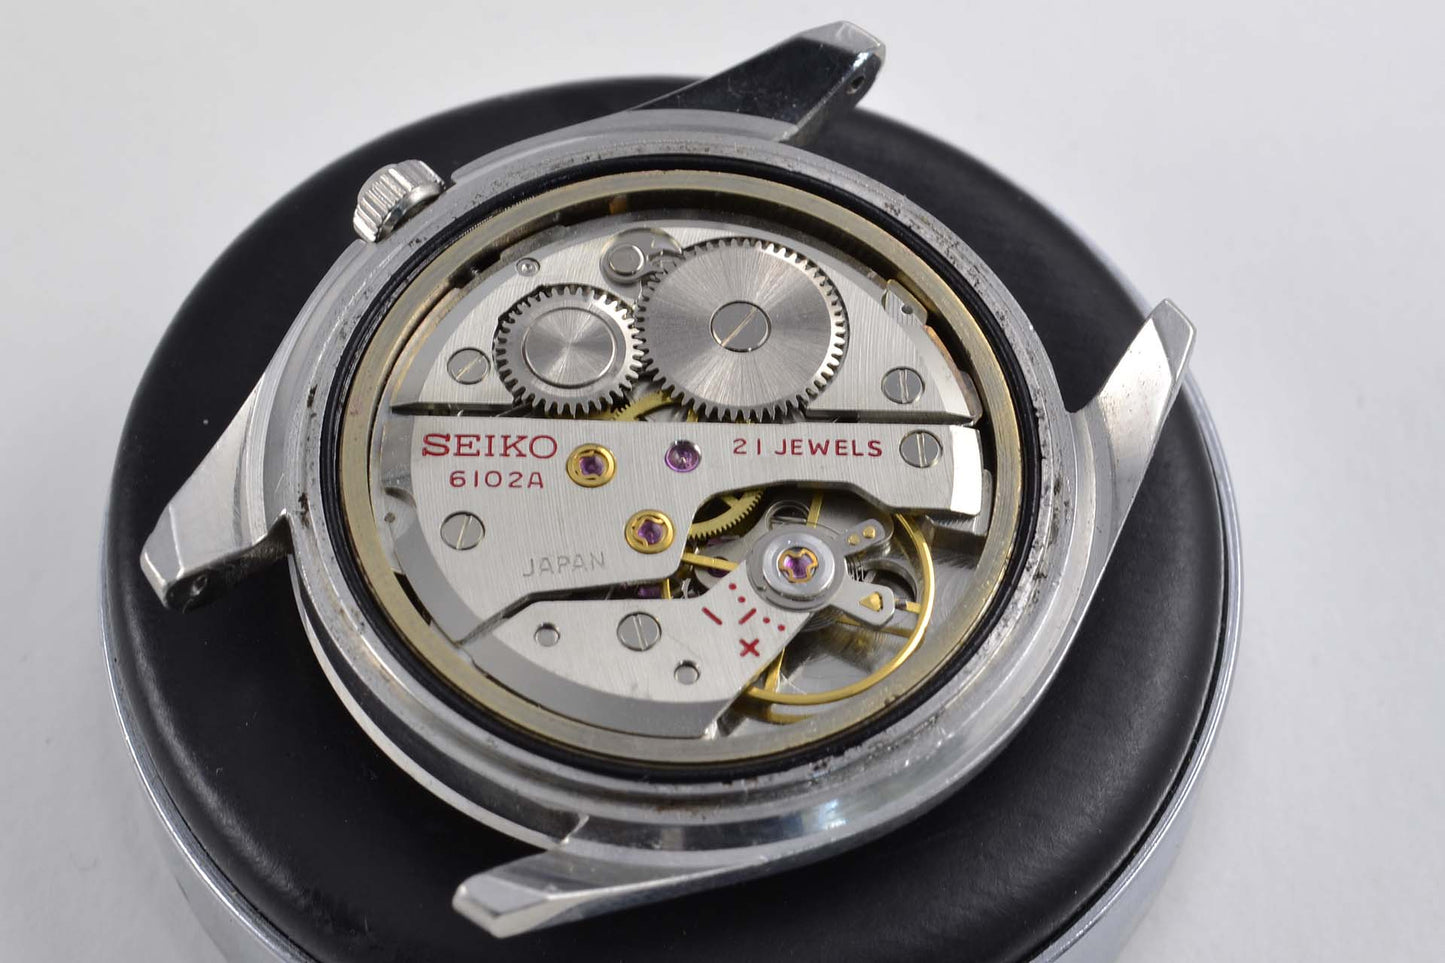 Seiko Skyliner Date 1969 Nippon Telegraph and Telephone - LumeVille